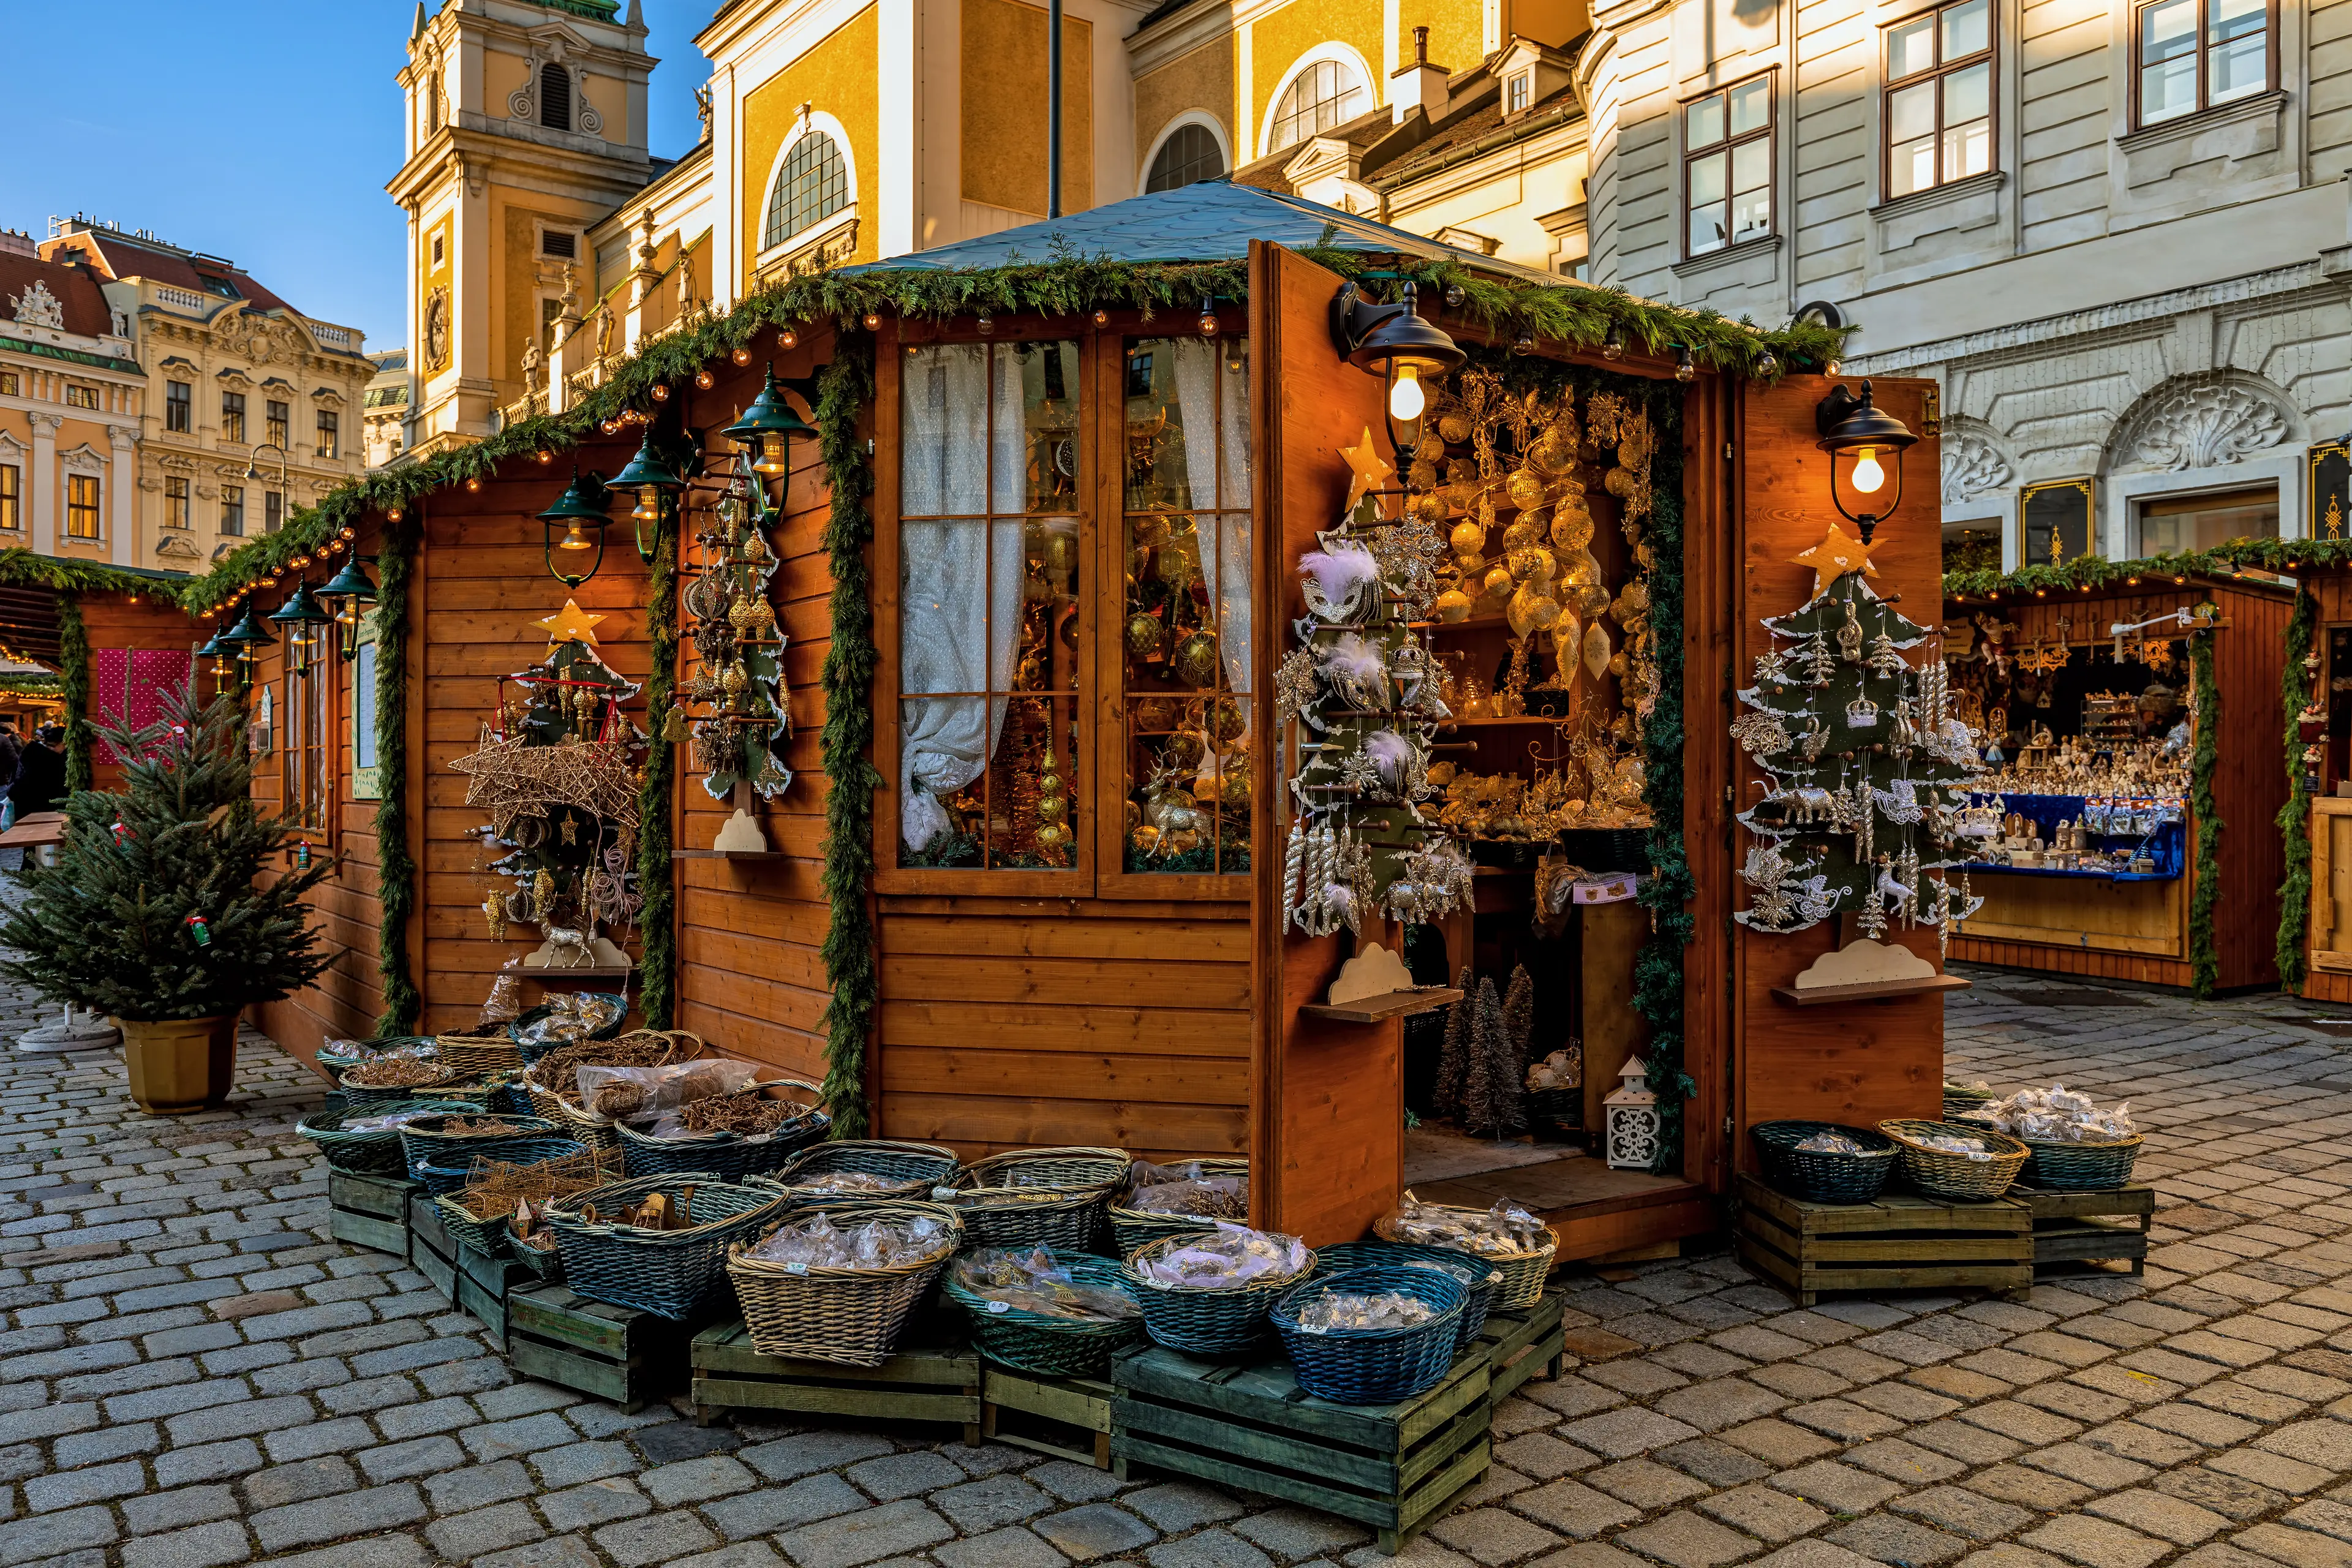 5-Day Family Christmas Holiday Itinerary in Vienna, Austria